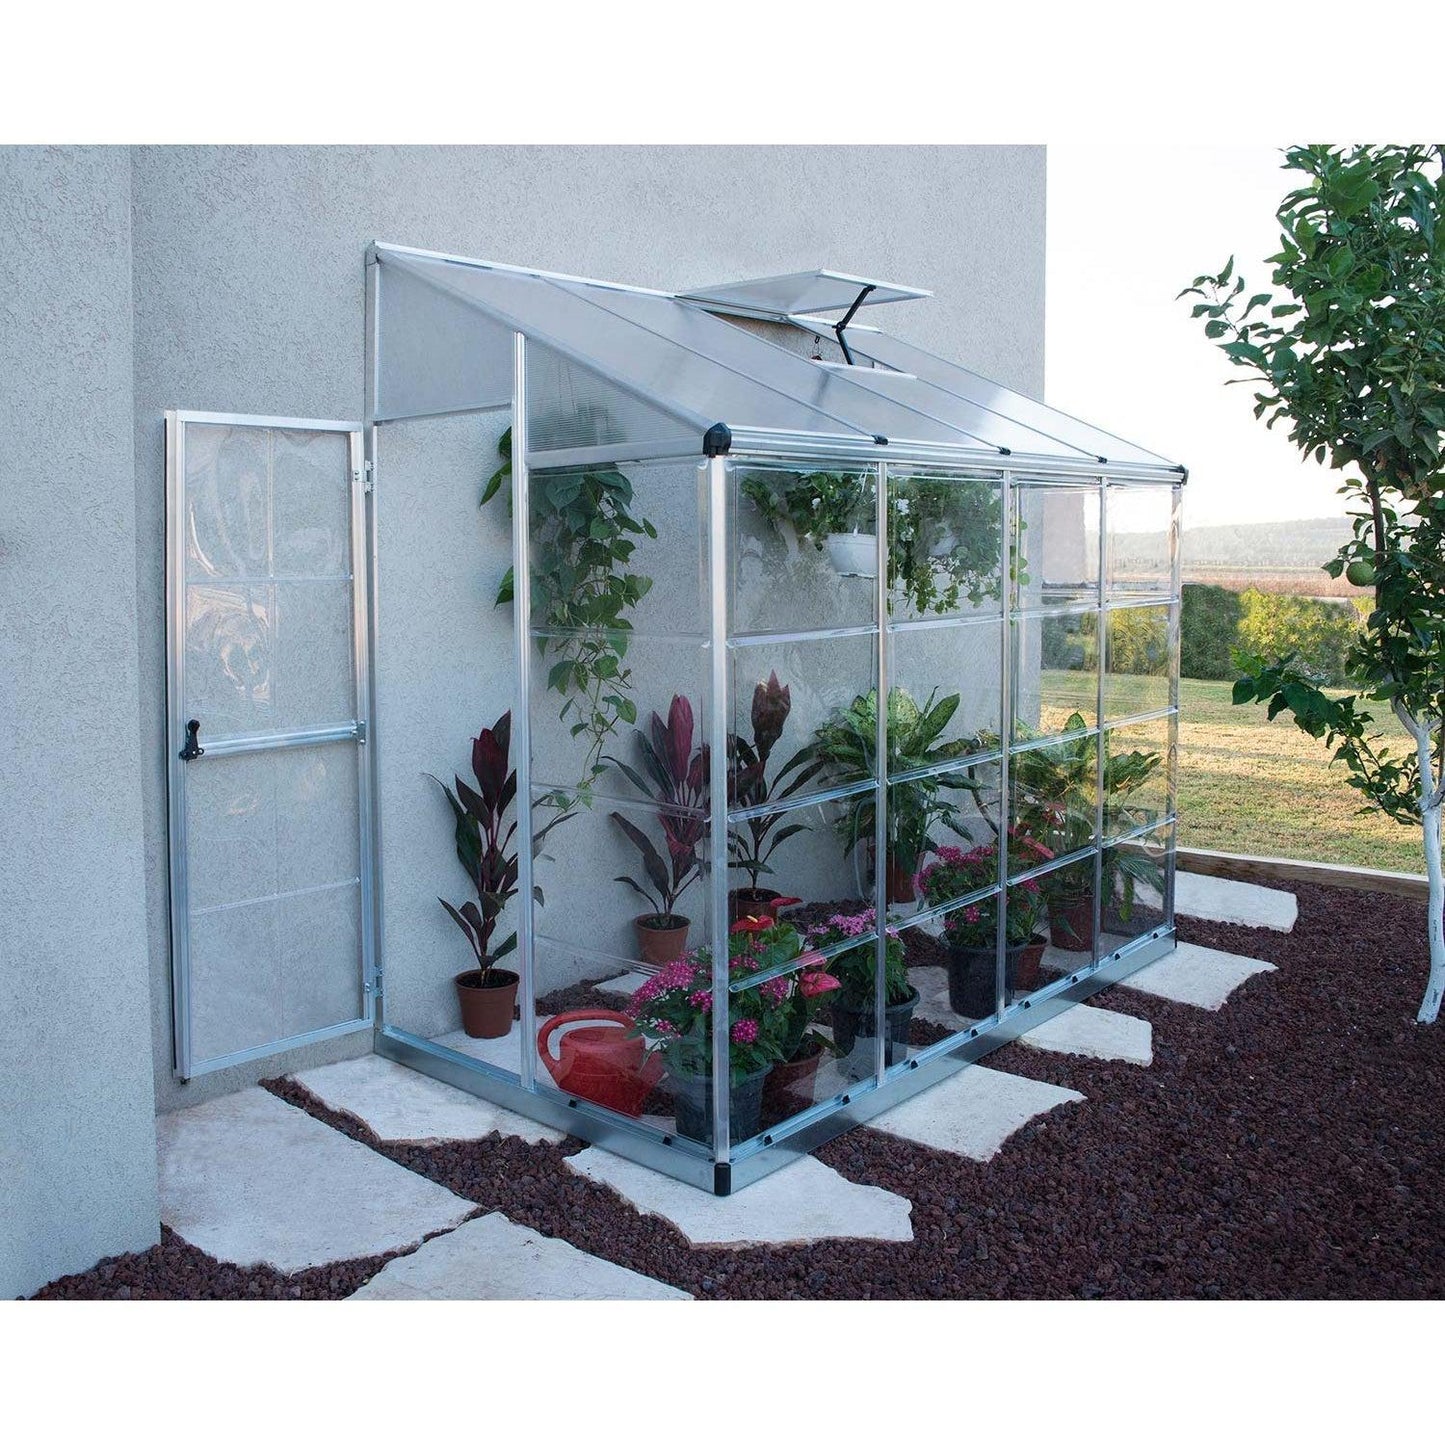 Lean-to Greenhouse 8 x 4 ft. | Palram-Canopia - Delightful Yard